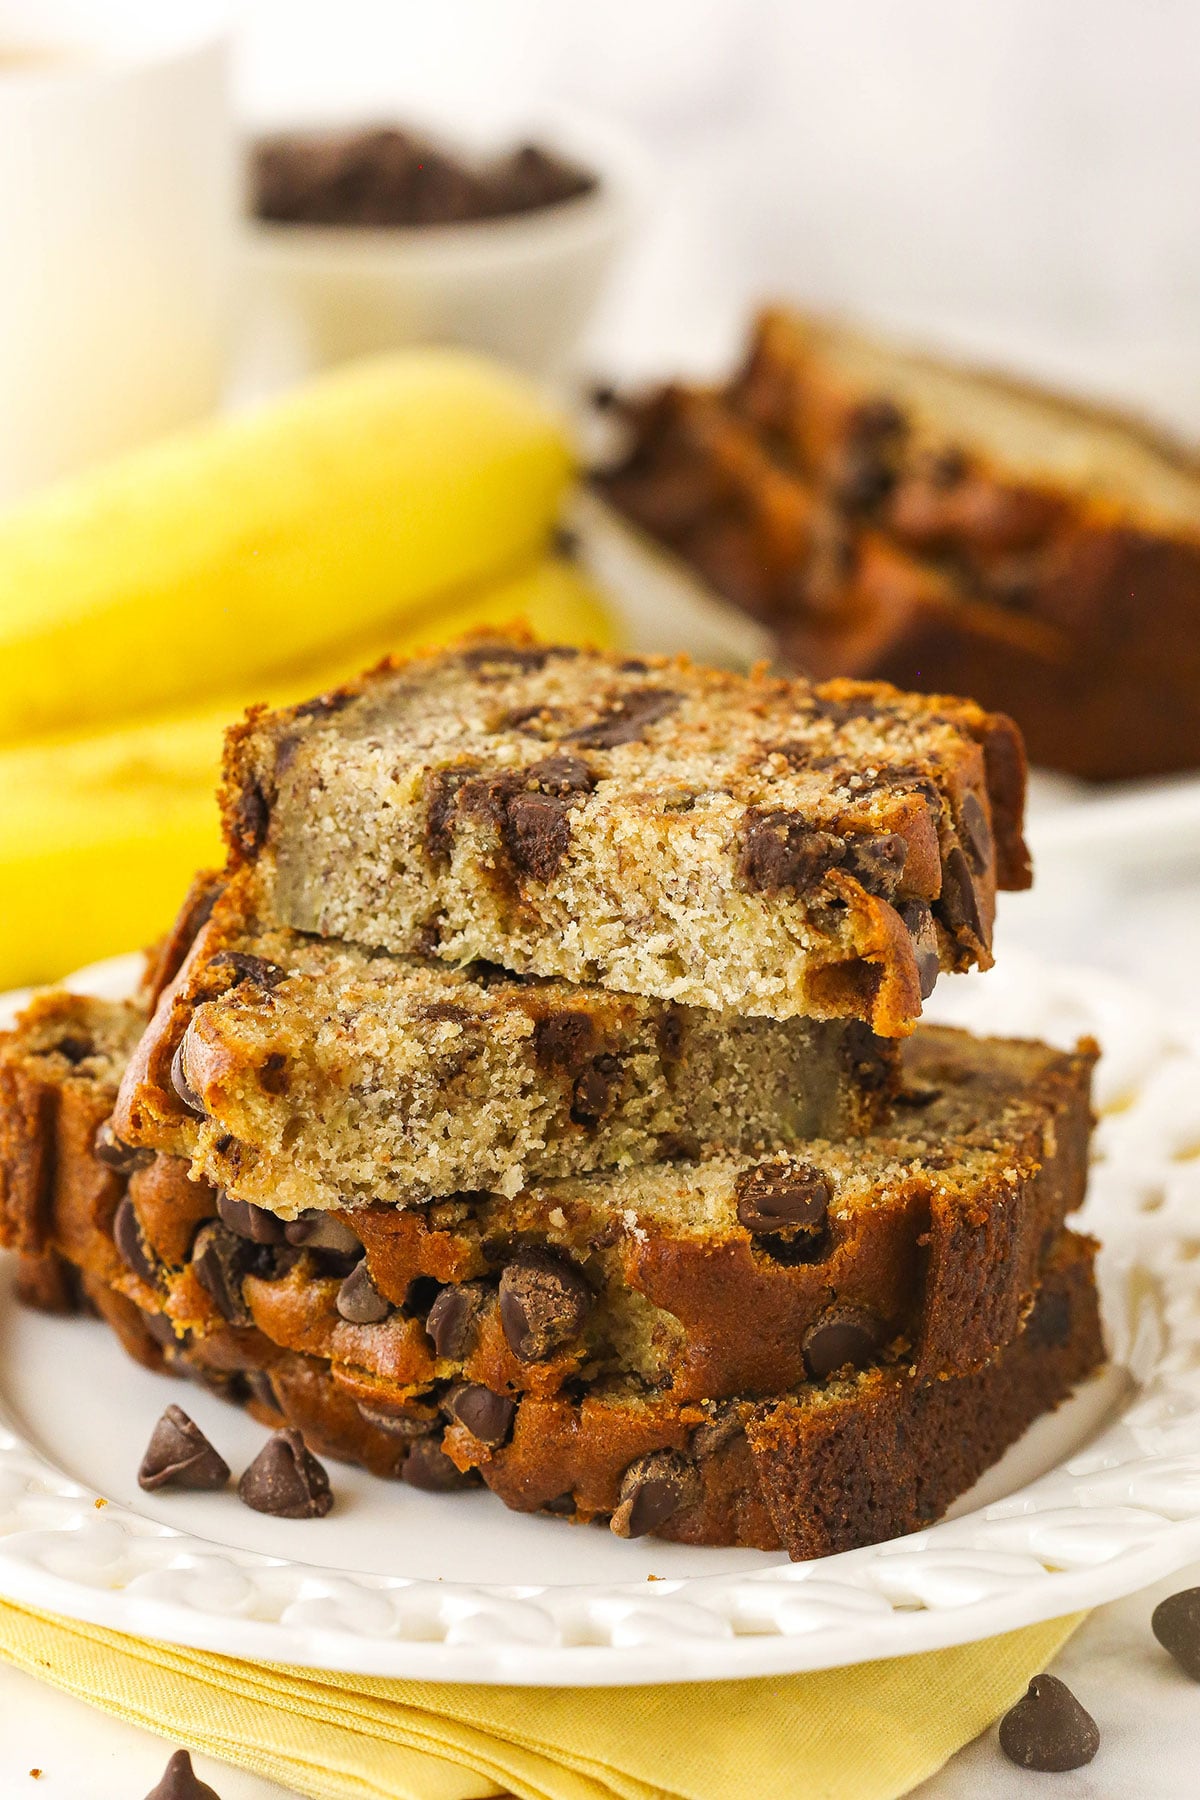 Slices of chocolate chip banana bread stacked onto a plate with two bananas in the background